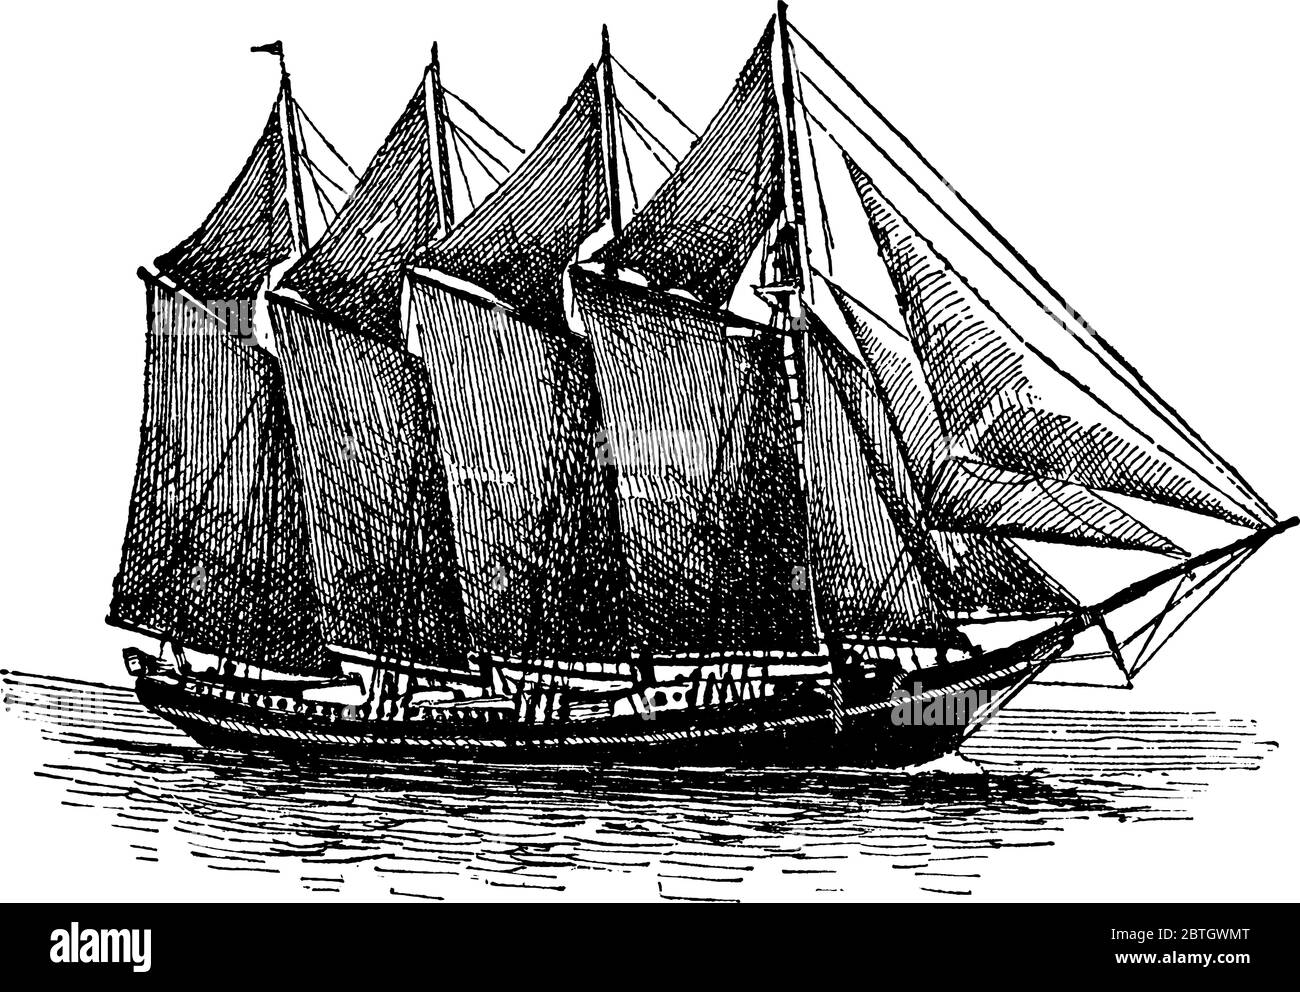 A four-masted schooner, a type of sailing vessel which uses fore-and-aft sails, vintage line drawing or engraving illustration. Stock Vector